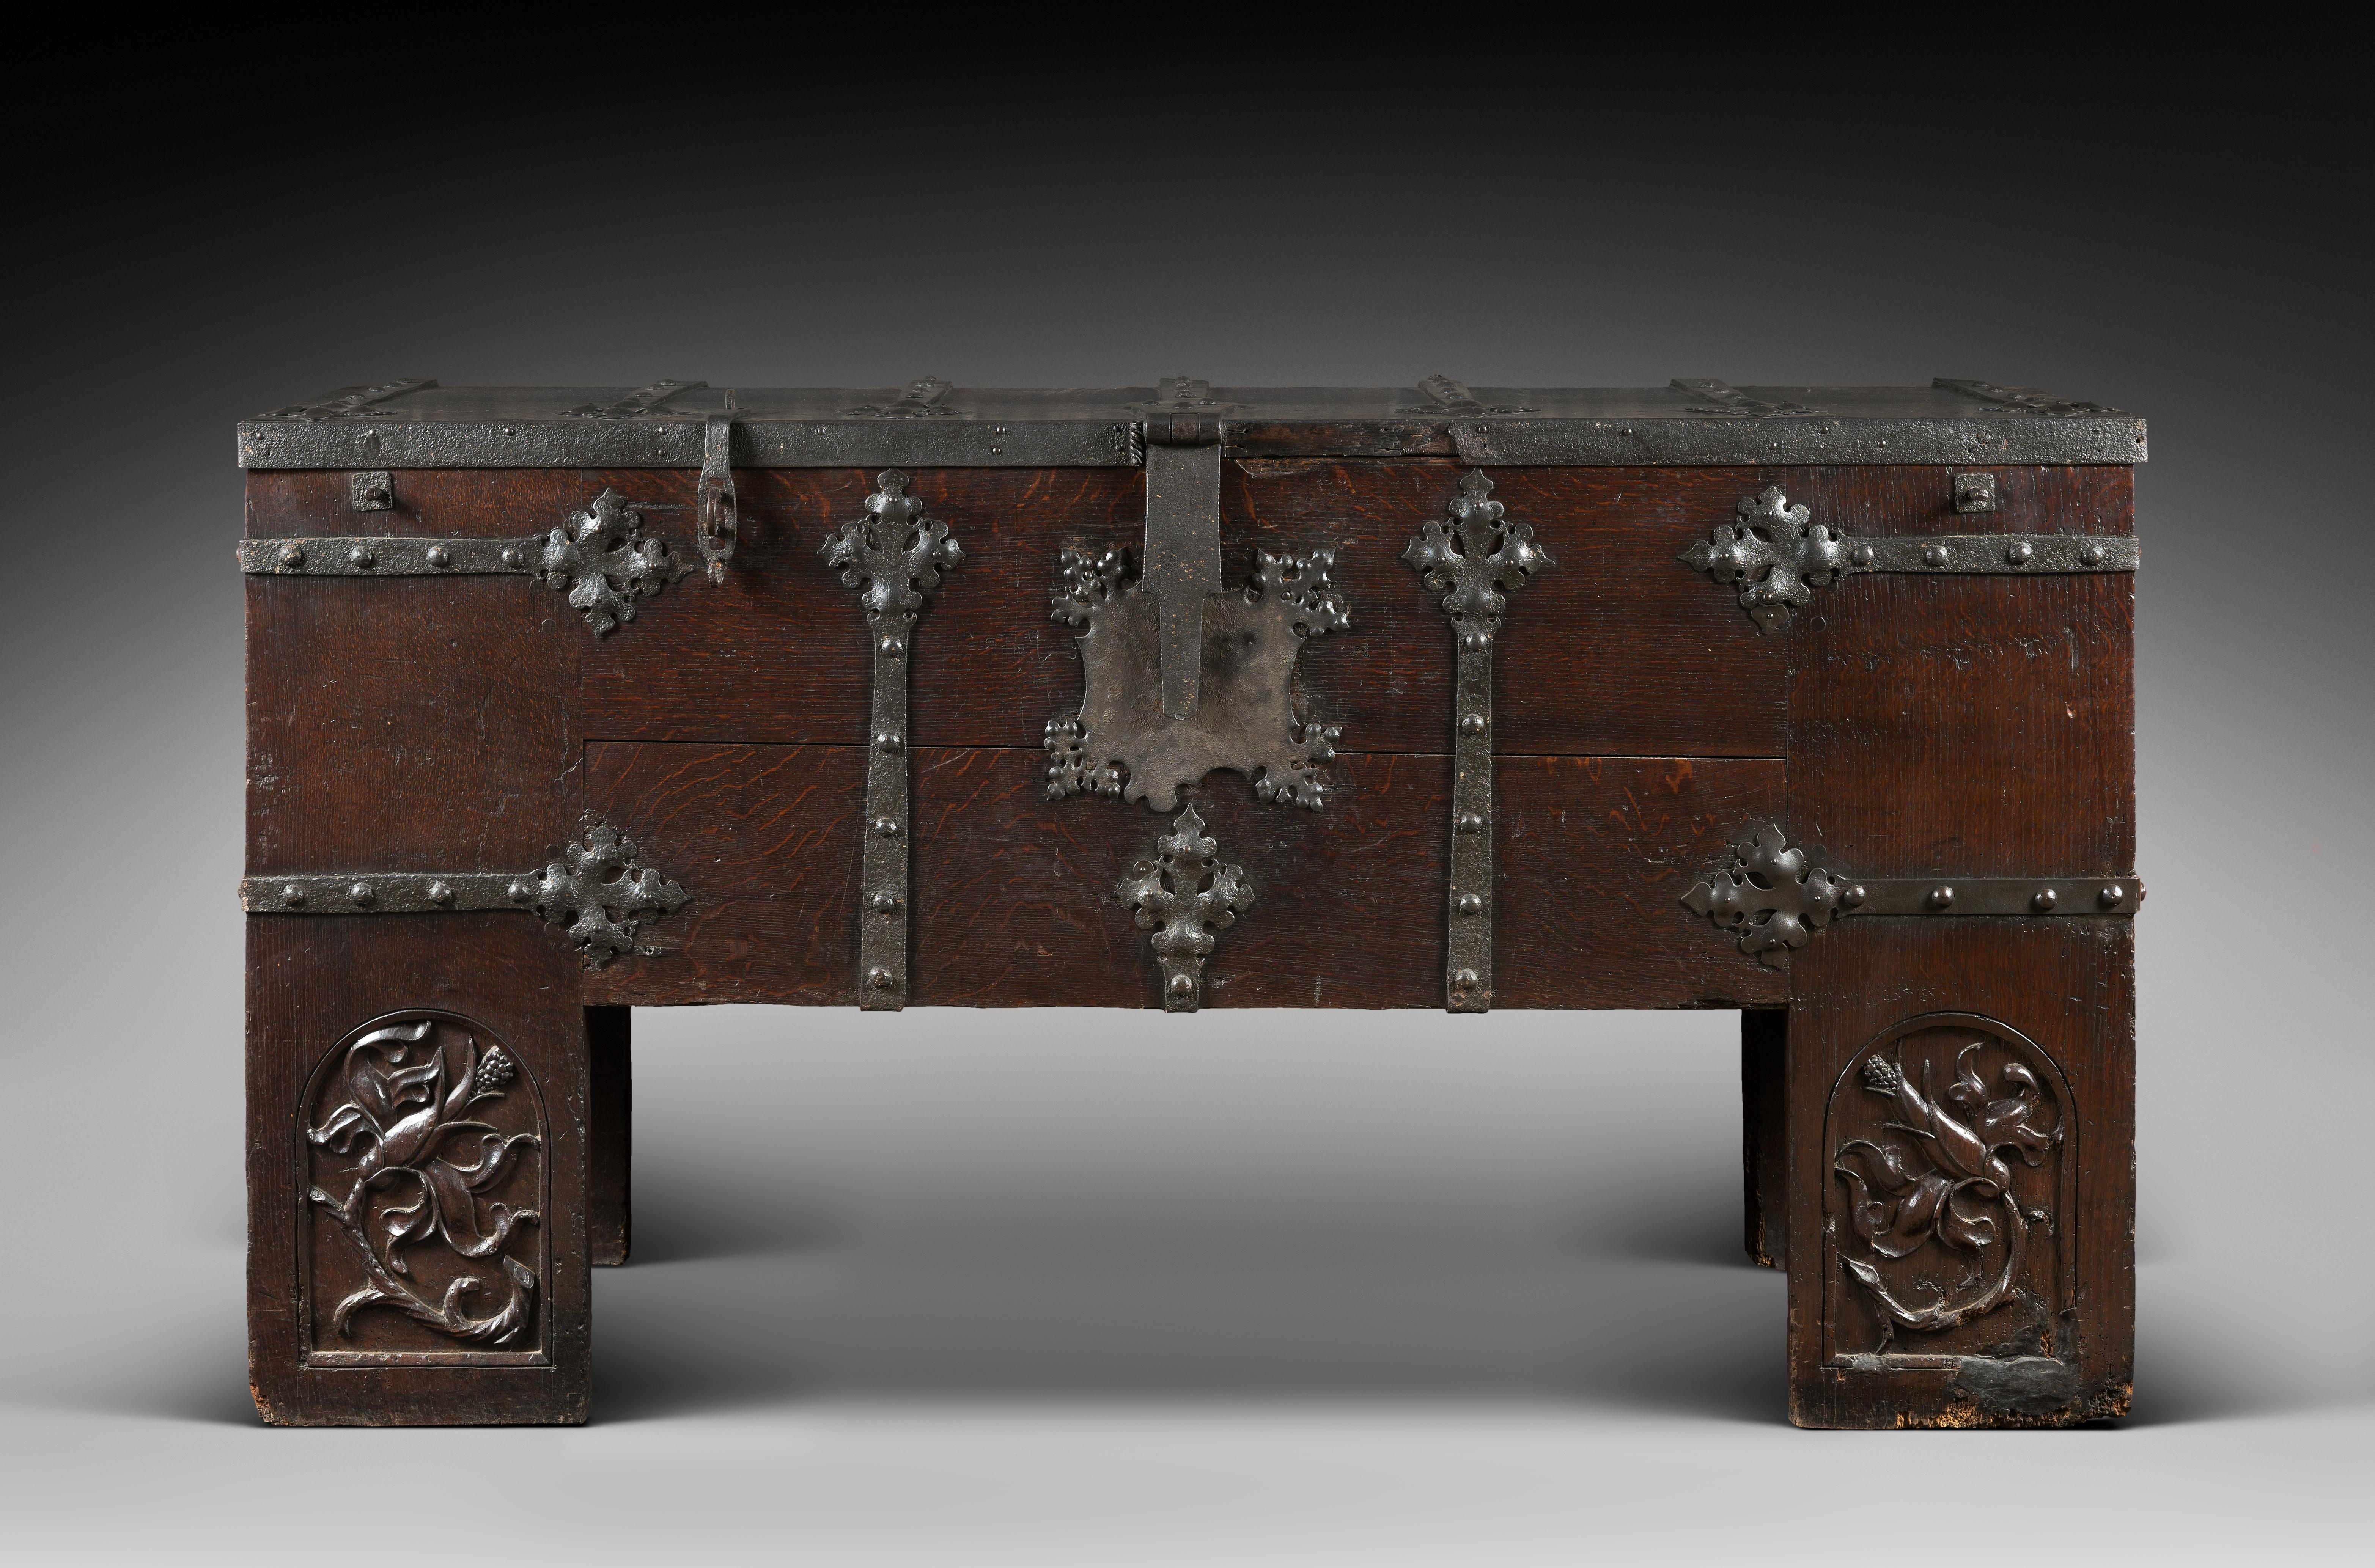 This large chest stands on high legs prolonging the lateral jambs. Presenting a sober and severe appearance the chest still belongs to the Medieval tradition. The piece is made from very high quality Hungarian wood.

The jambs are joined to the